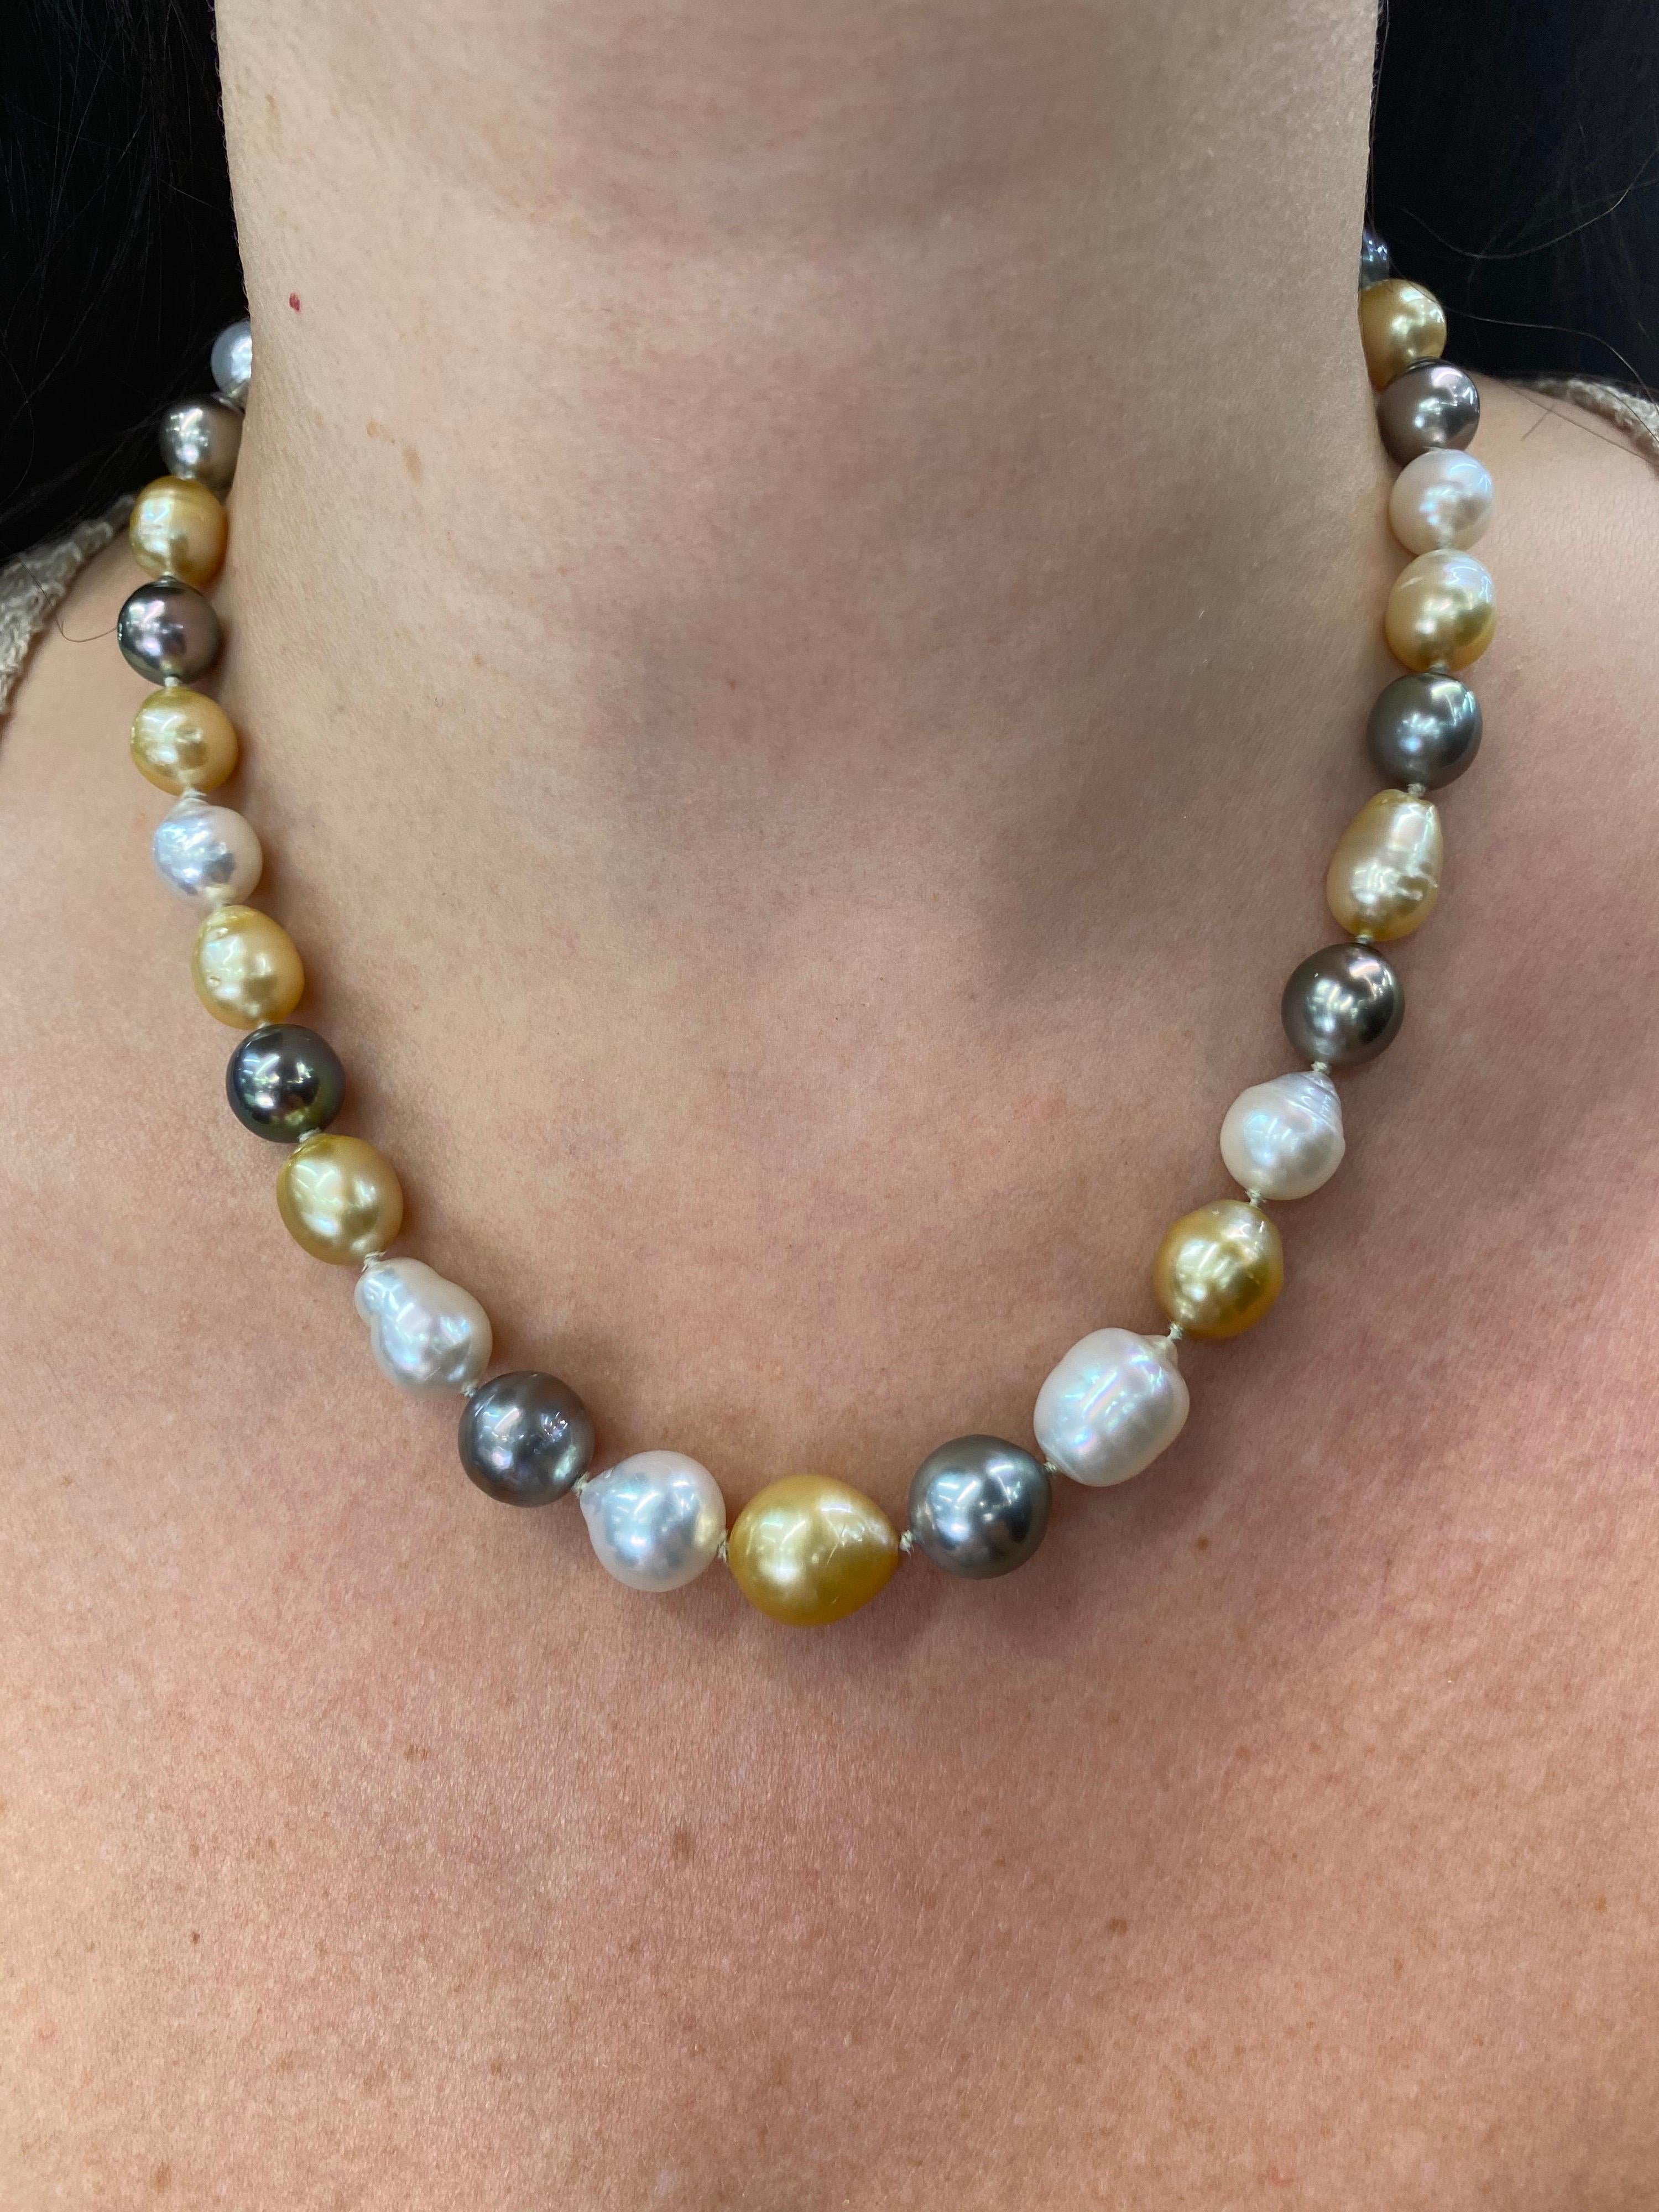 A lovely strand of 35 multi-color baroque pearls featuring White South Sea, Golden South Sea and Tahitian pearls measuring 9.1-12 mm with a satin finish gold clasp and two diamond on each side. 

Pearl quality: AAA
Pearl Luster: AAA Excellent
Nacre